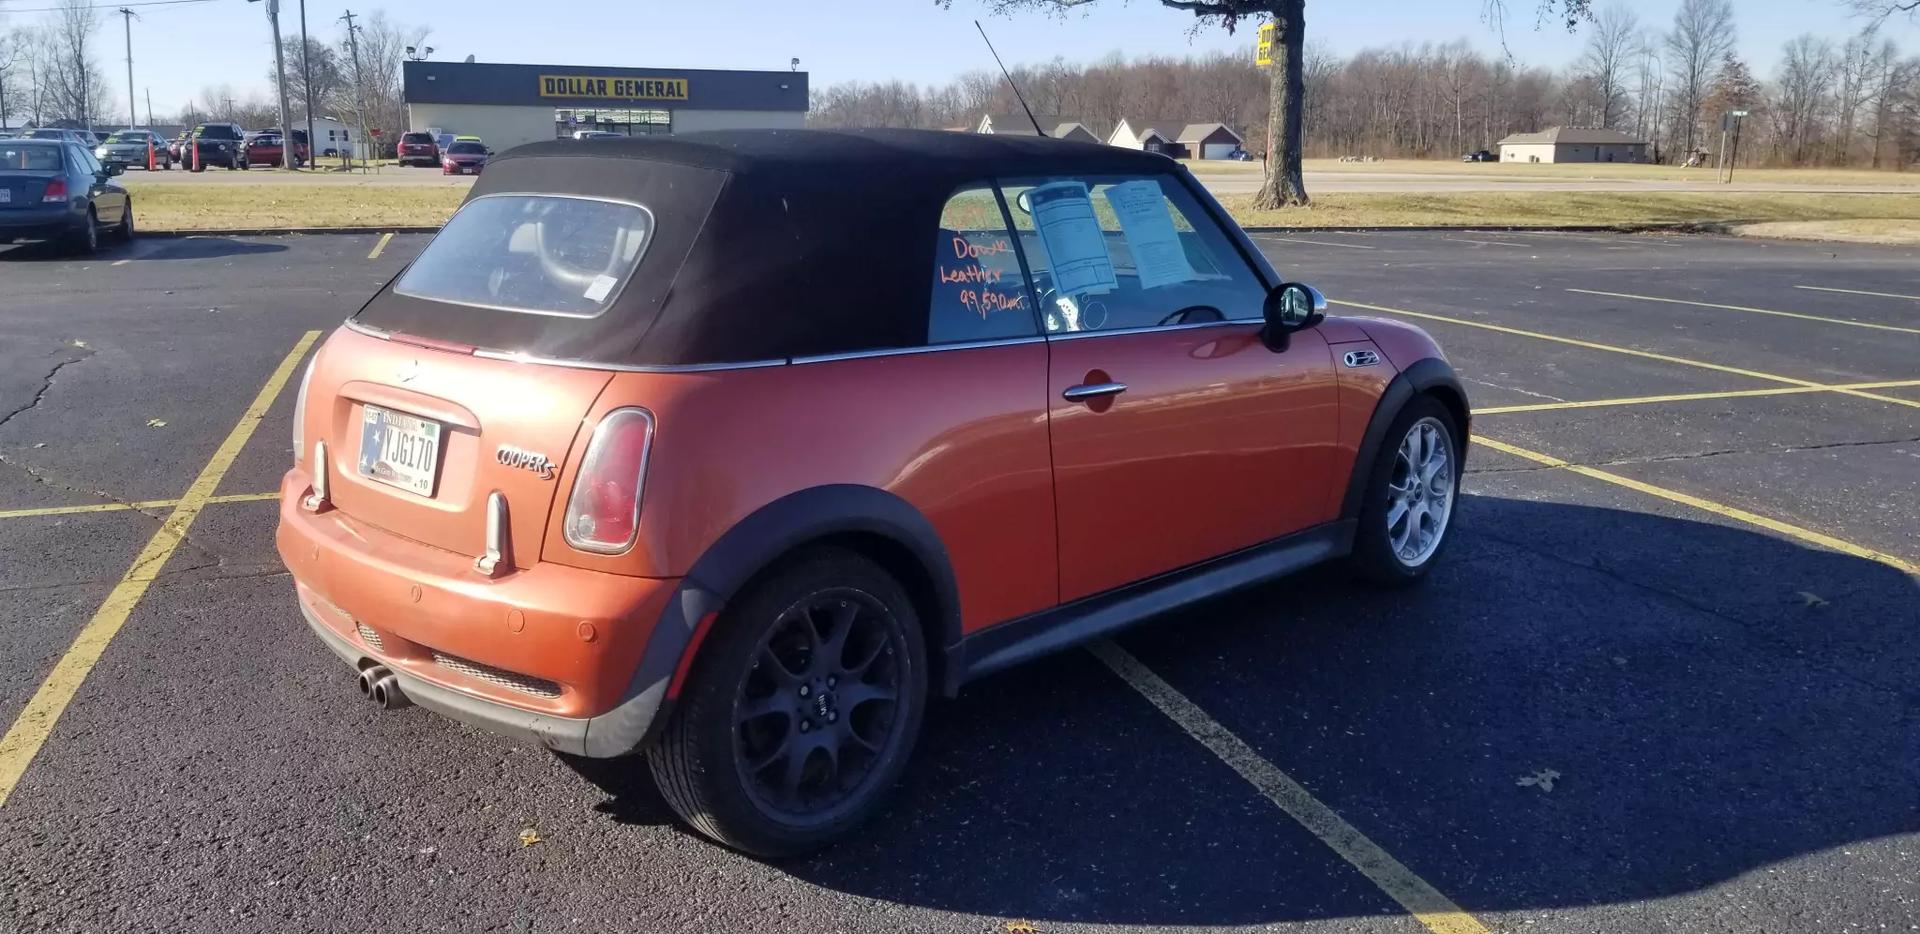 USED MINI CONVERTIBLE 2006 for sale in New Washington, IN | Mike Dean ...